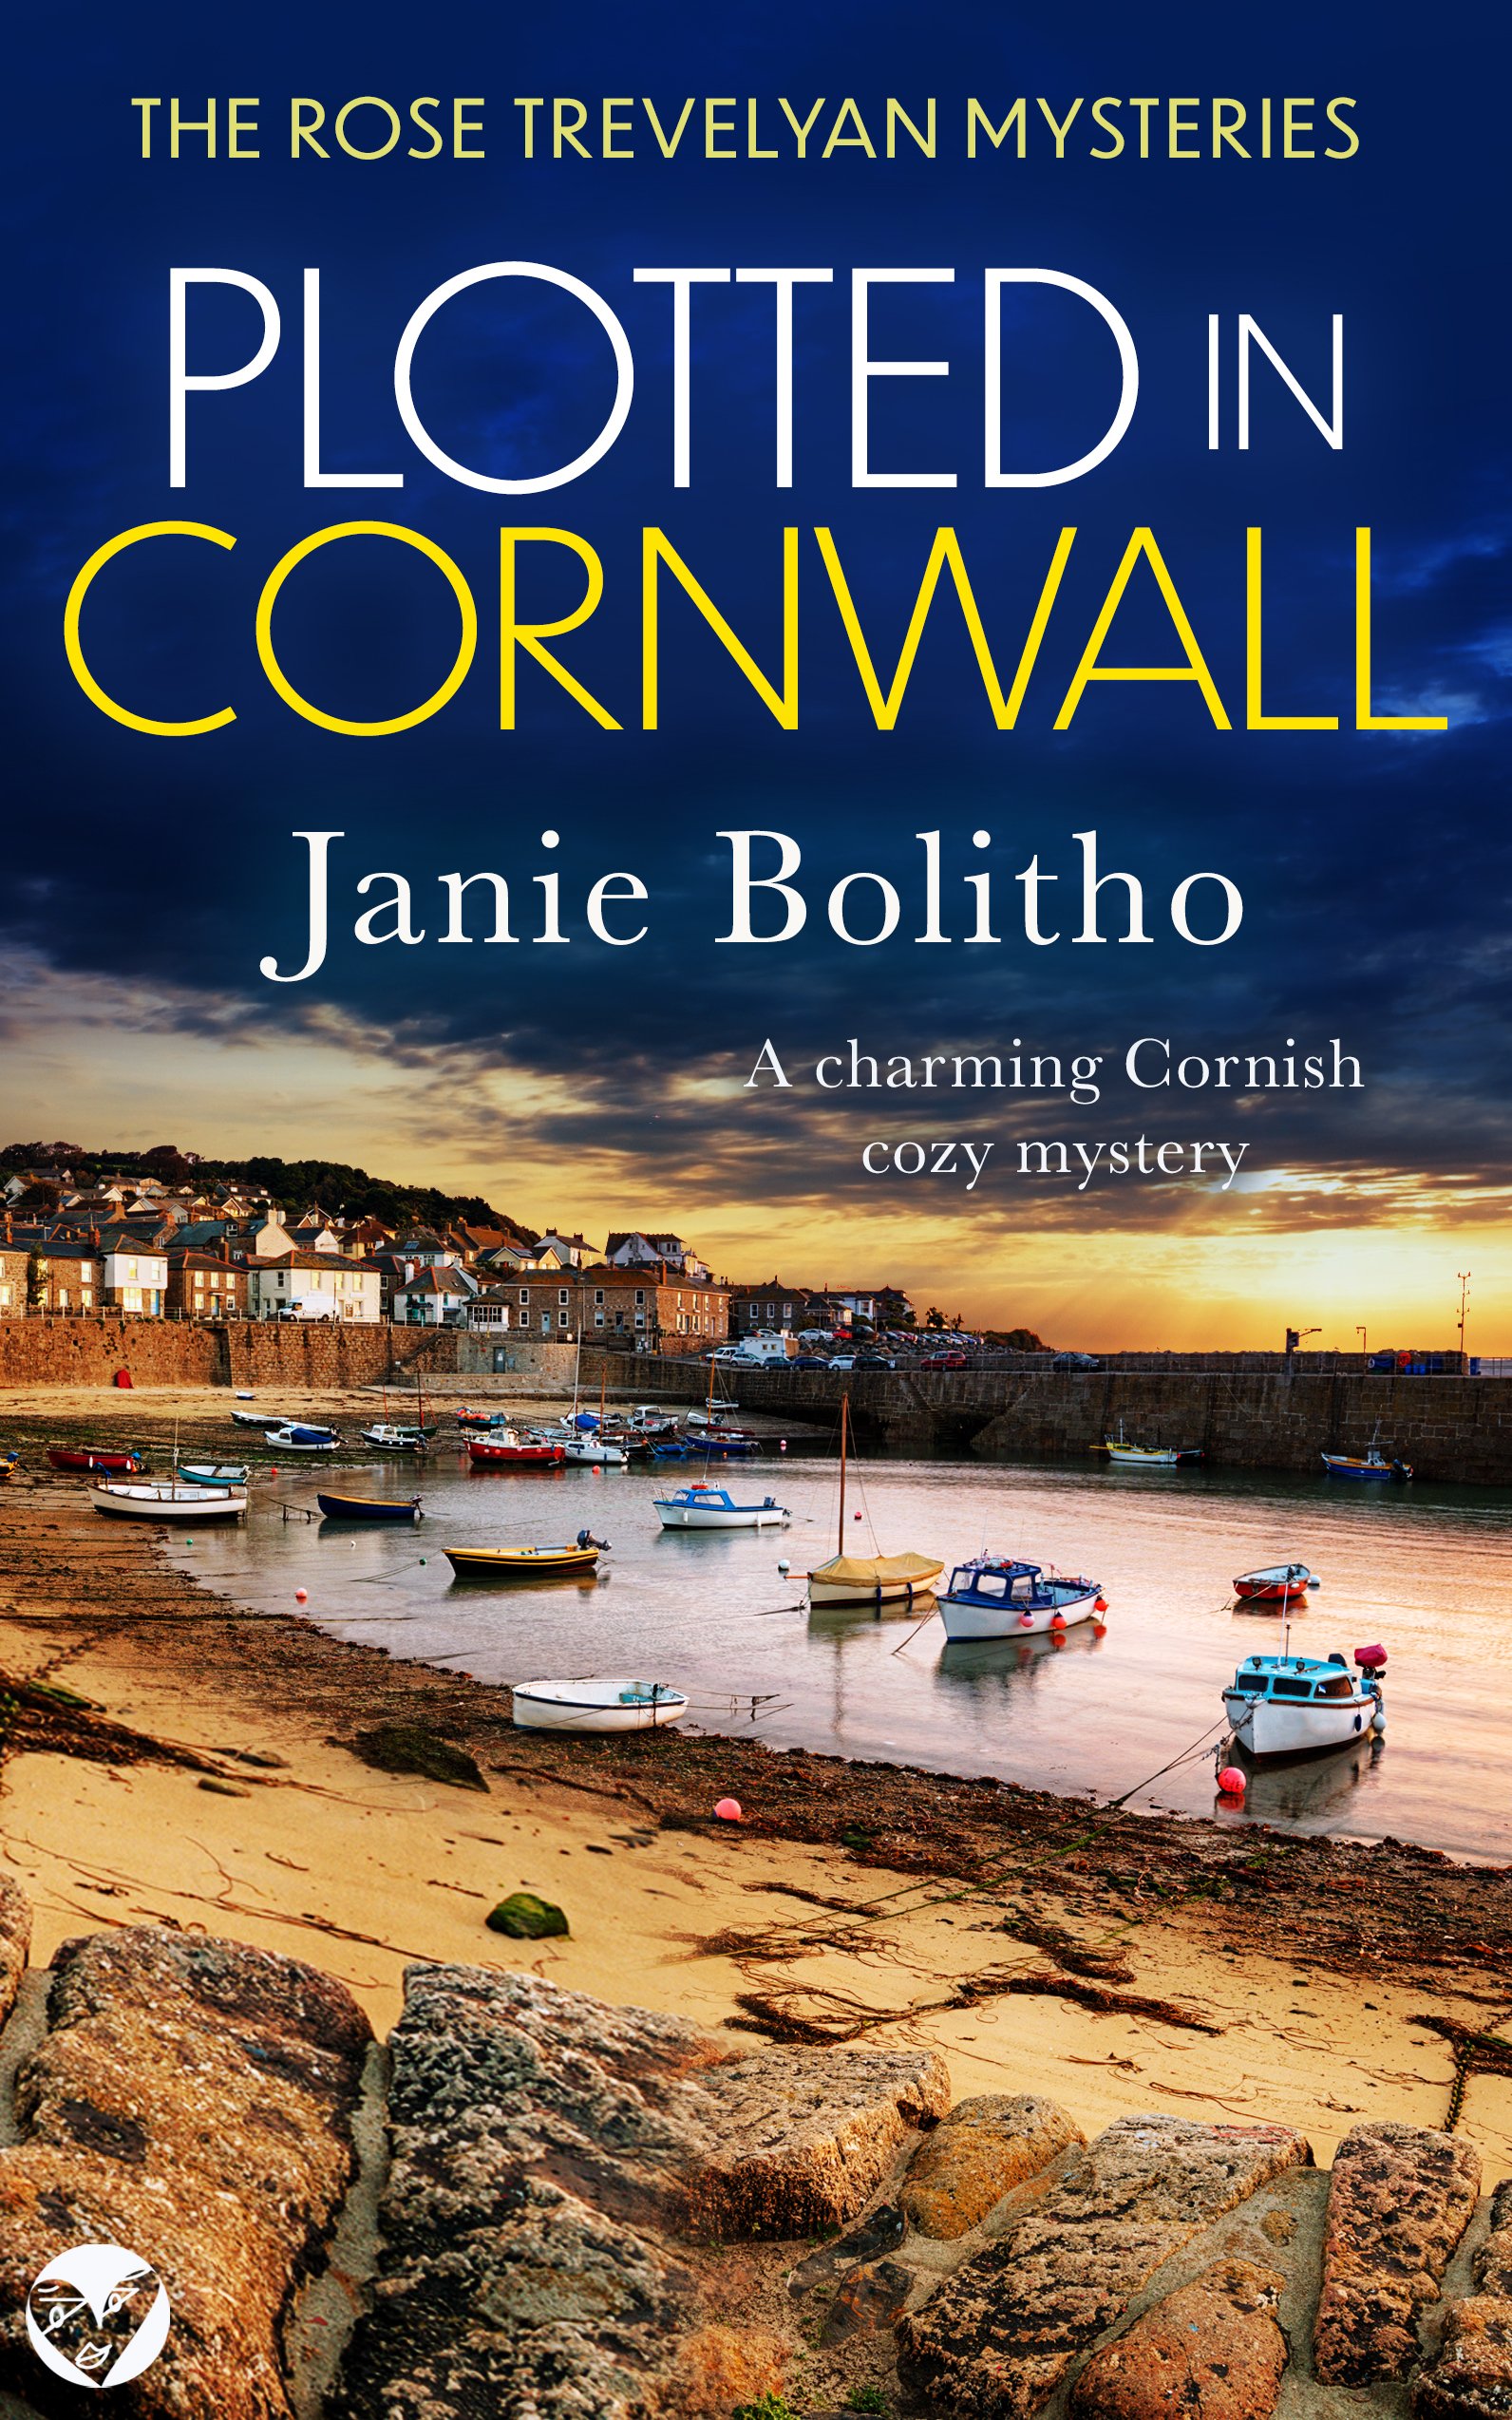 PLOTTED IN CORNWALL Cover publish.jpg